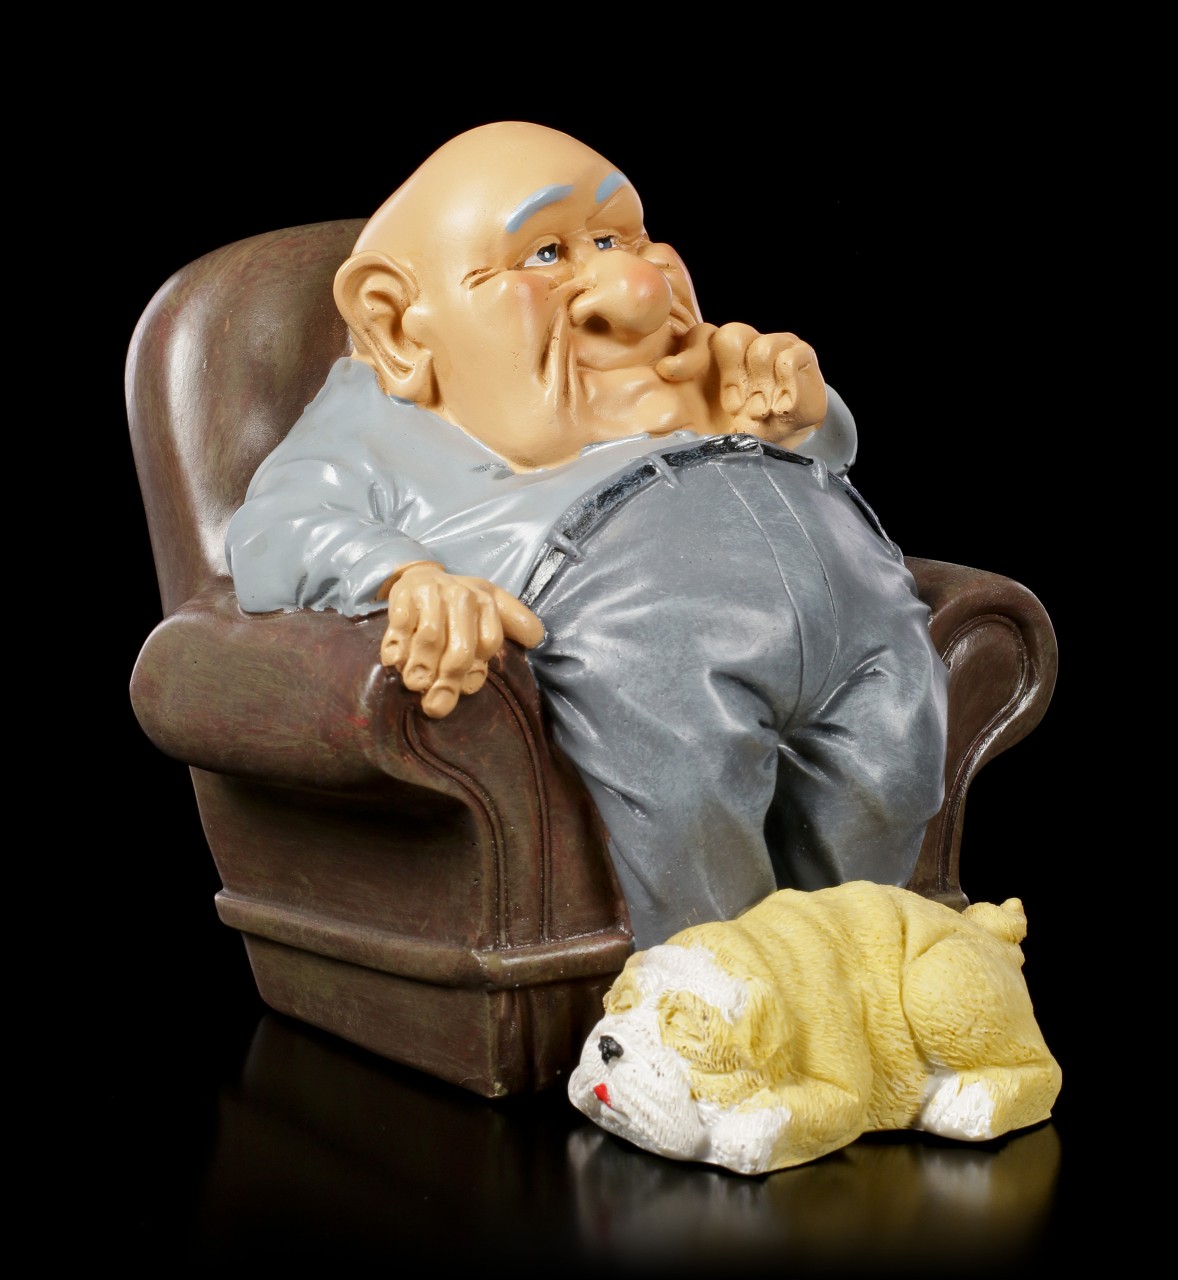 Funny Family Figurine - Grandpa in Armchair with Dog